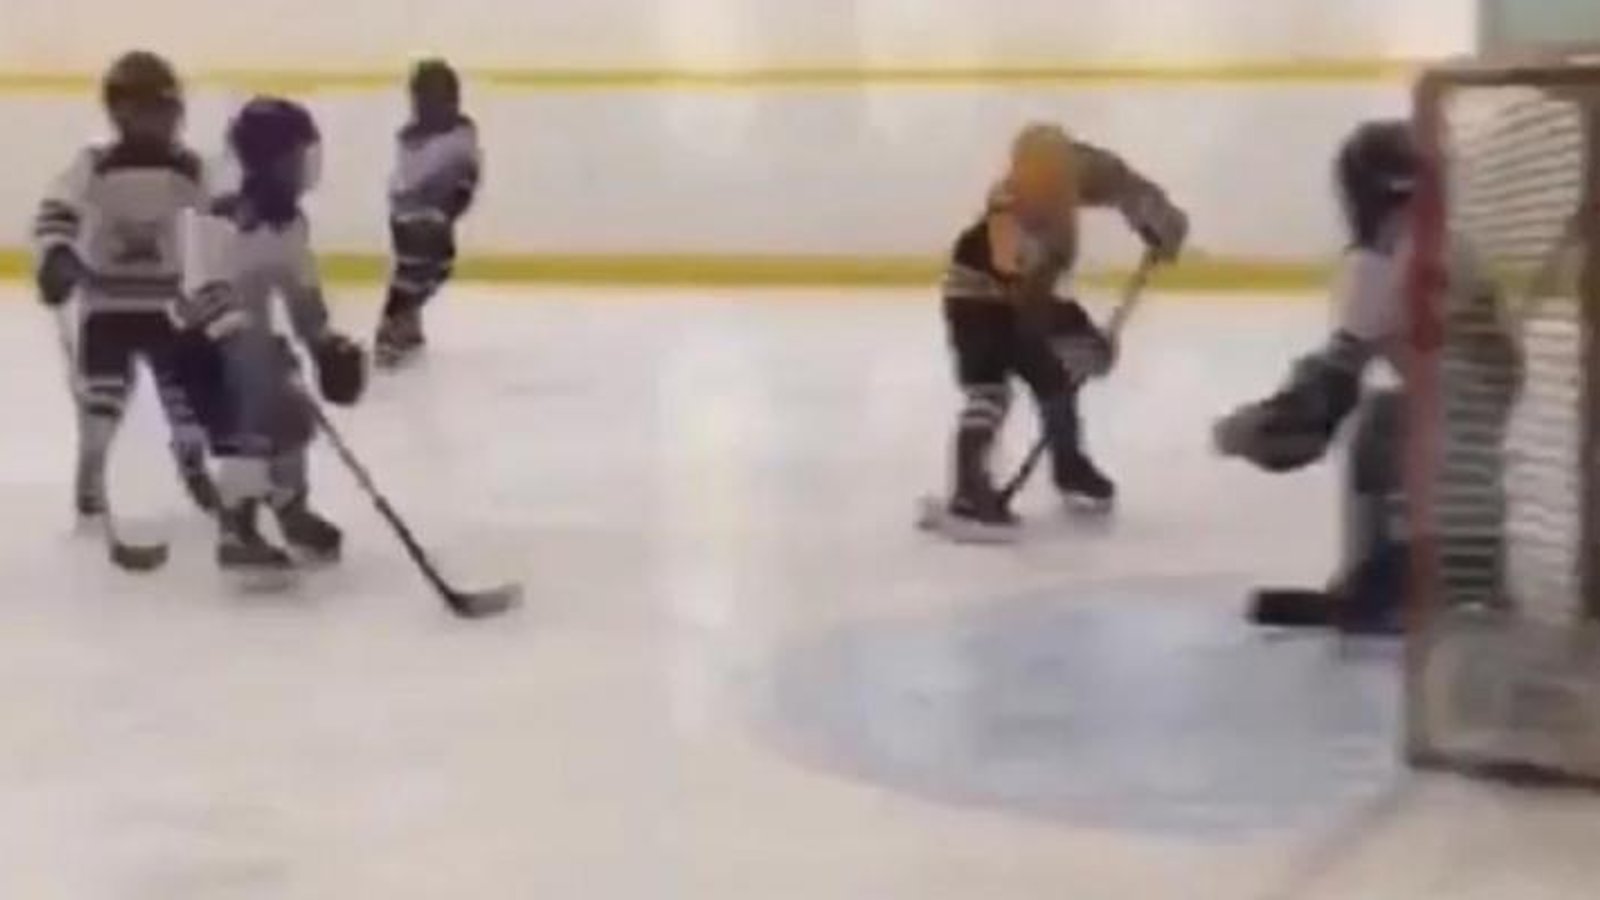 6 year old kid scores a pretty sick goal!